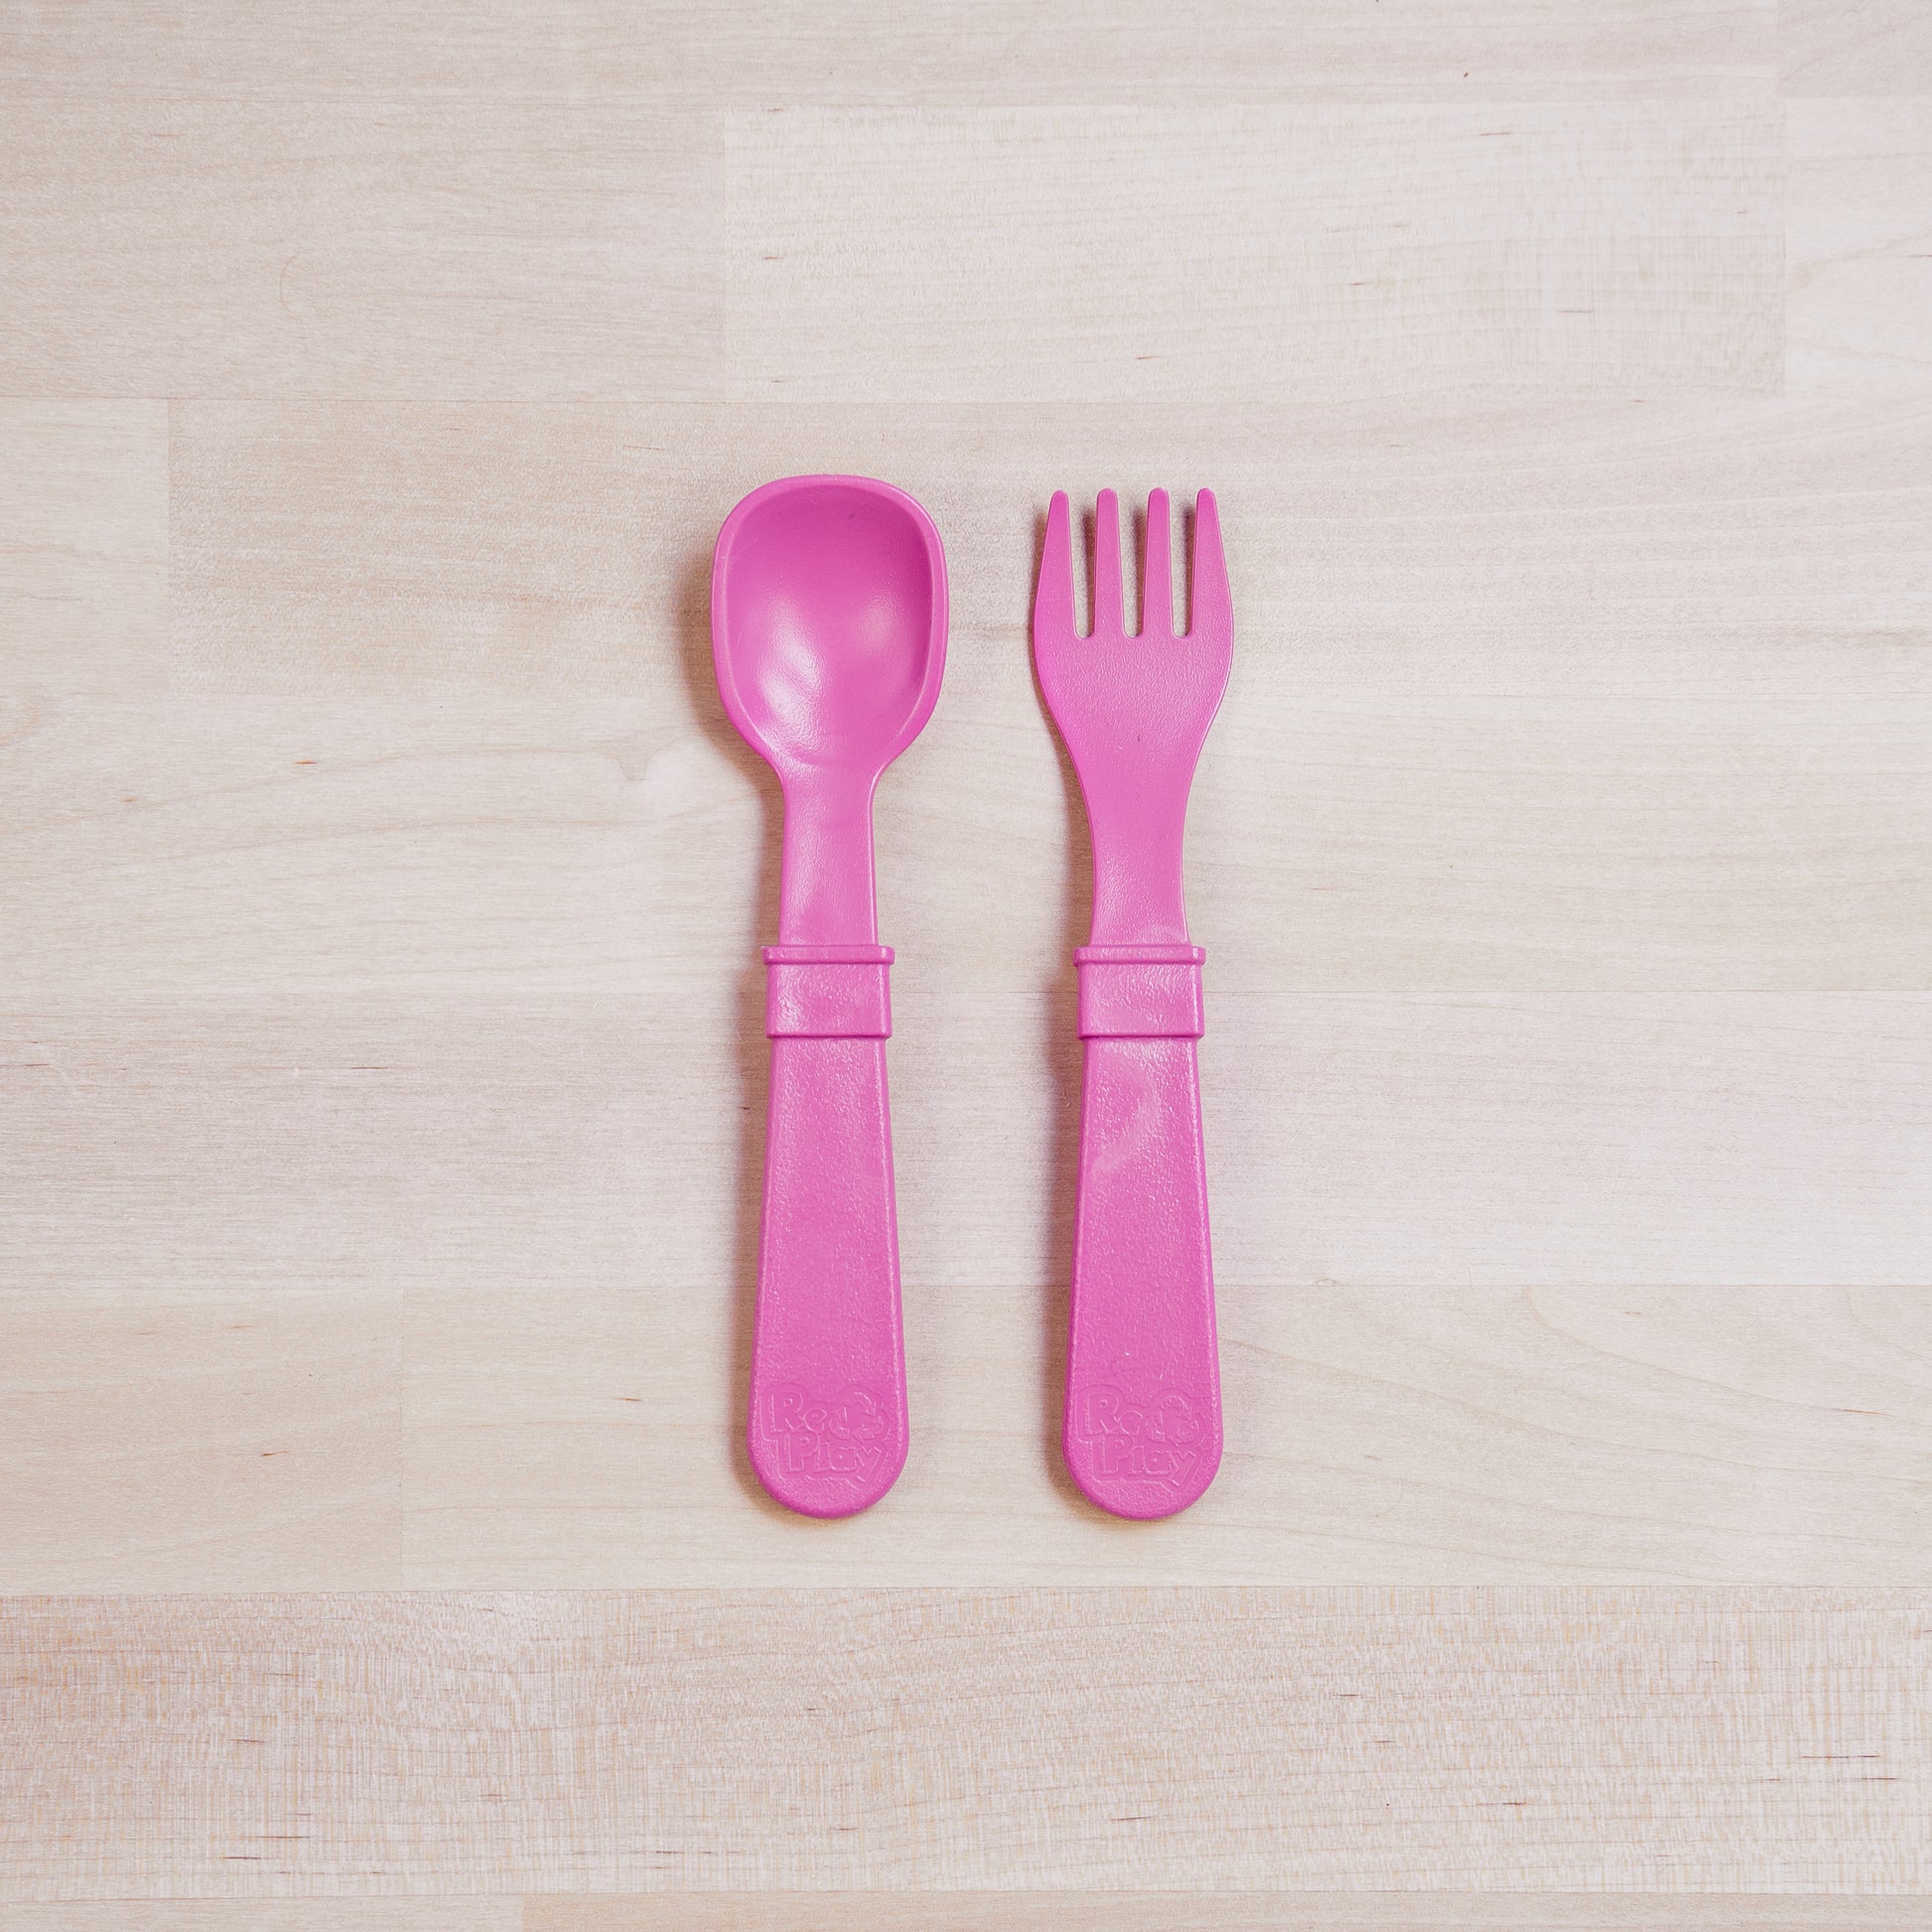 Re-Play Utensil Set | Bright Pink Fork & Spoon from Bear & Moo